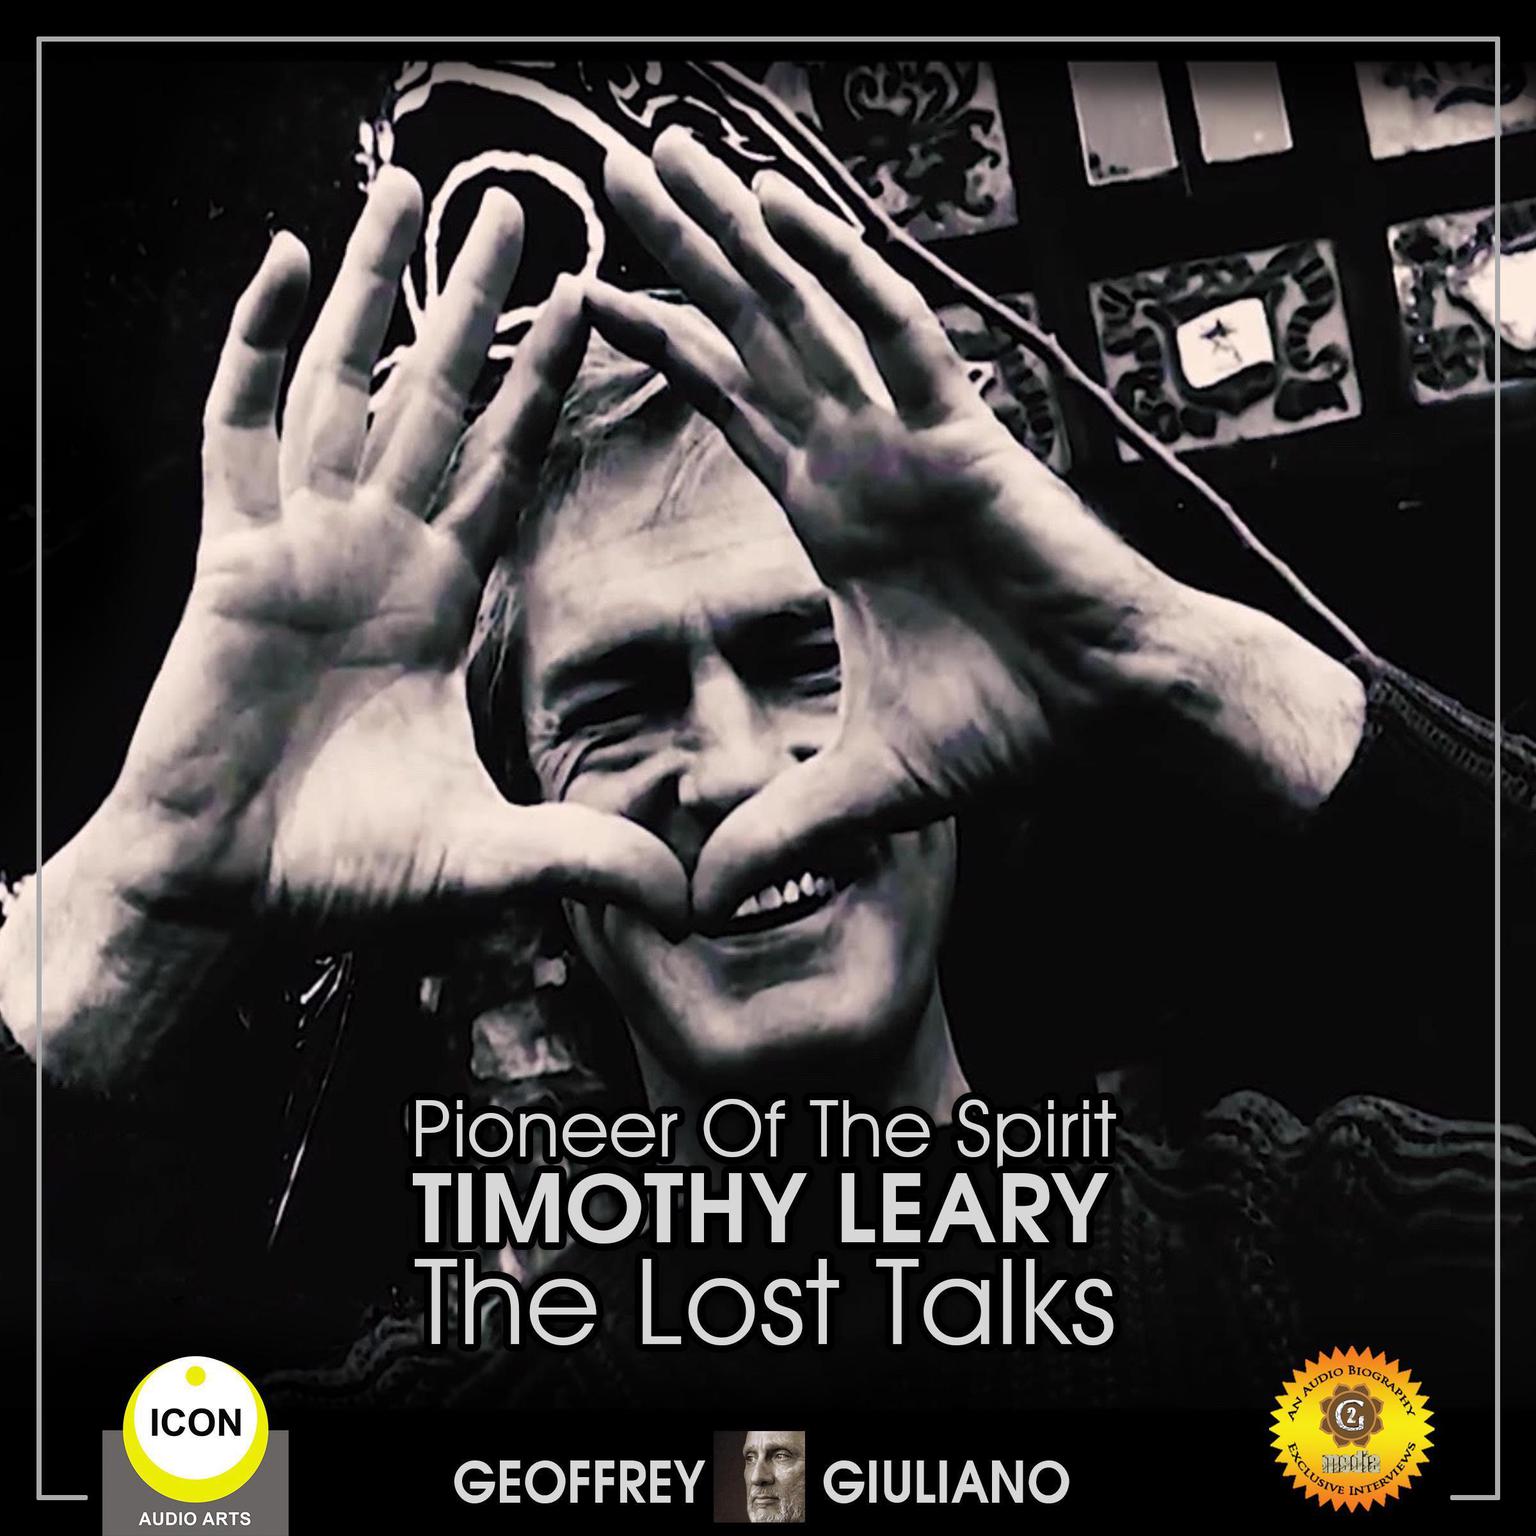 Pioneer Of The Spirit Timothy Leary - The Lost Talks Audiobook, by Geoffrey Giuliano